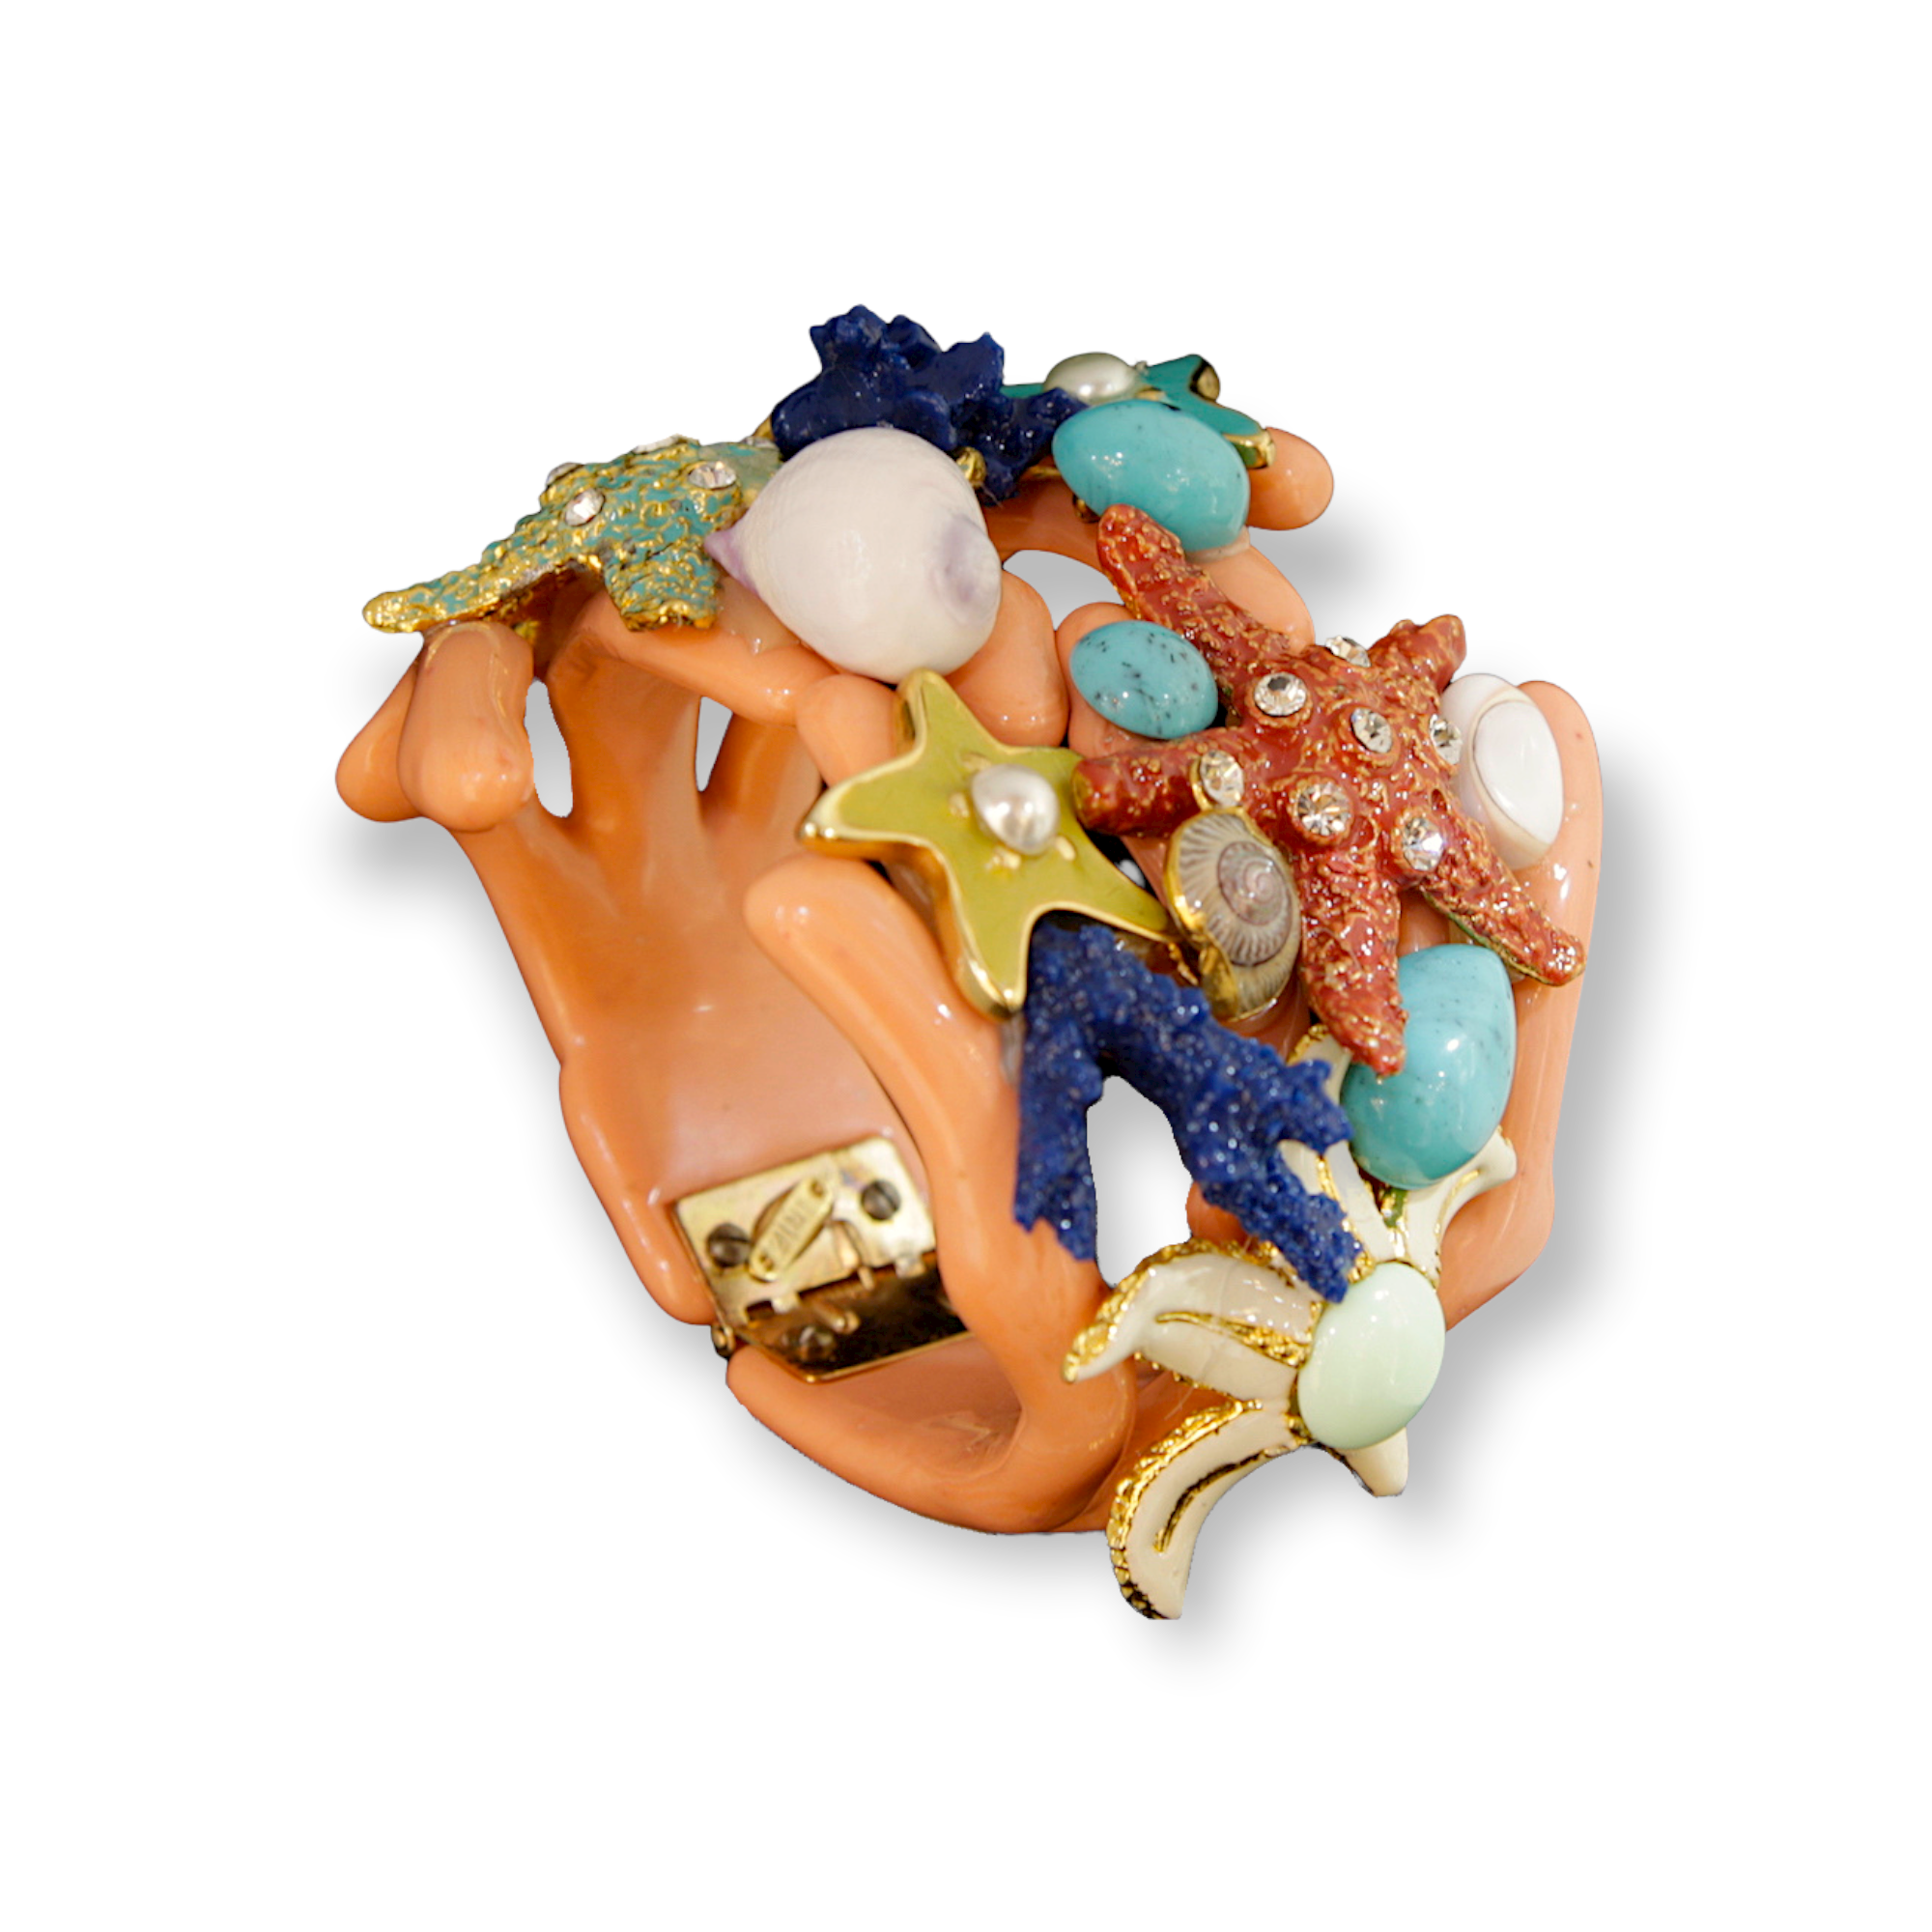 Made in Italy. Carlo Zini Magnificent bracelet with a coral reef theme Hypoallergenic rhodium plated in 18 KT gold and multicolor enamels elegant construction in swarovski crystals, pearls and multicolored resins 100% handmade 